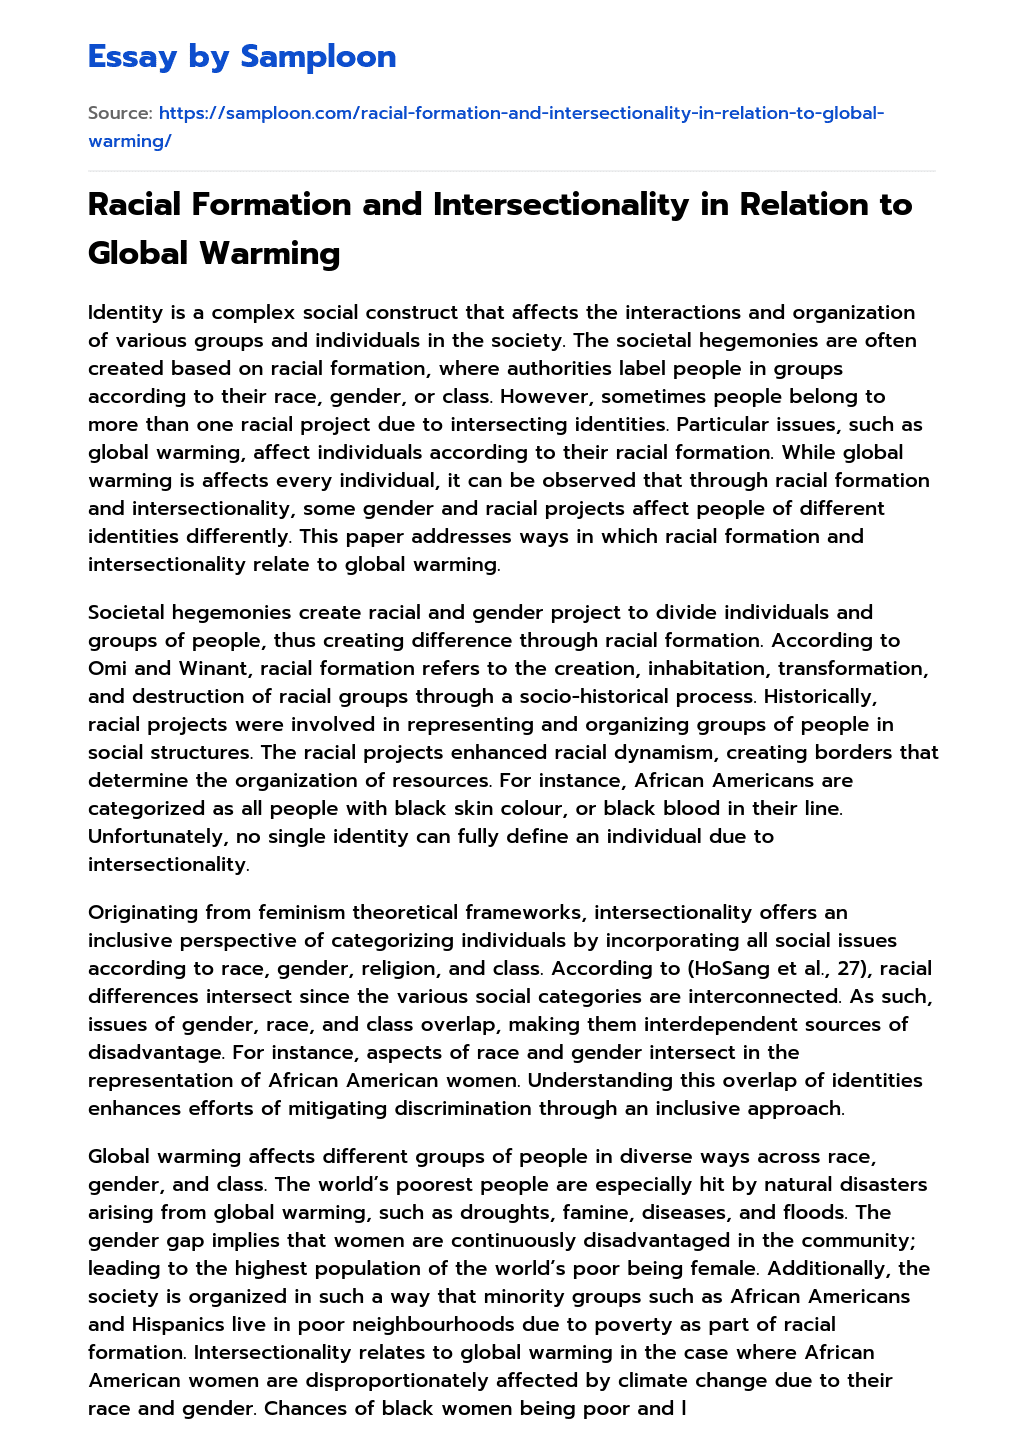 Racial Formation and Intersectionality in Relation to Global Warming essay